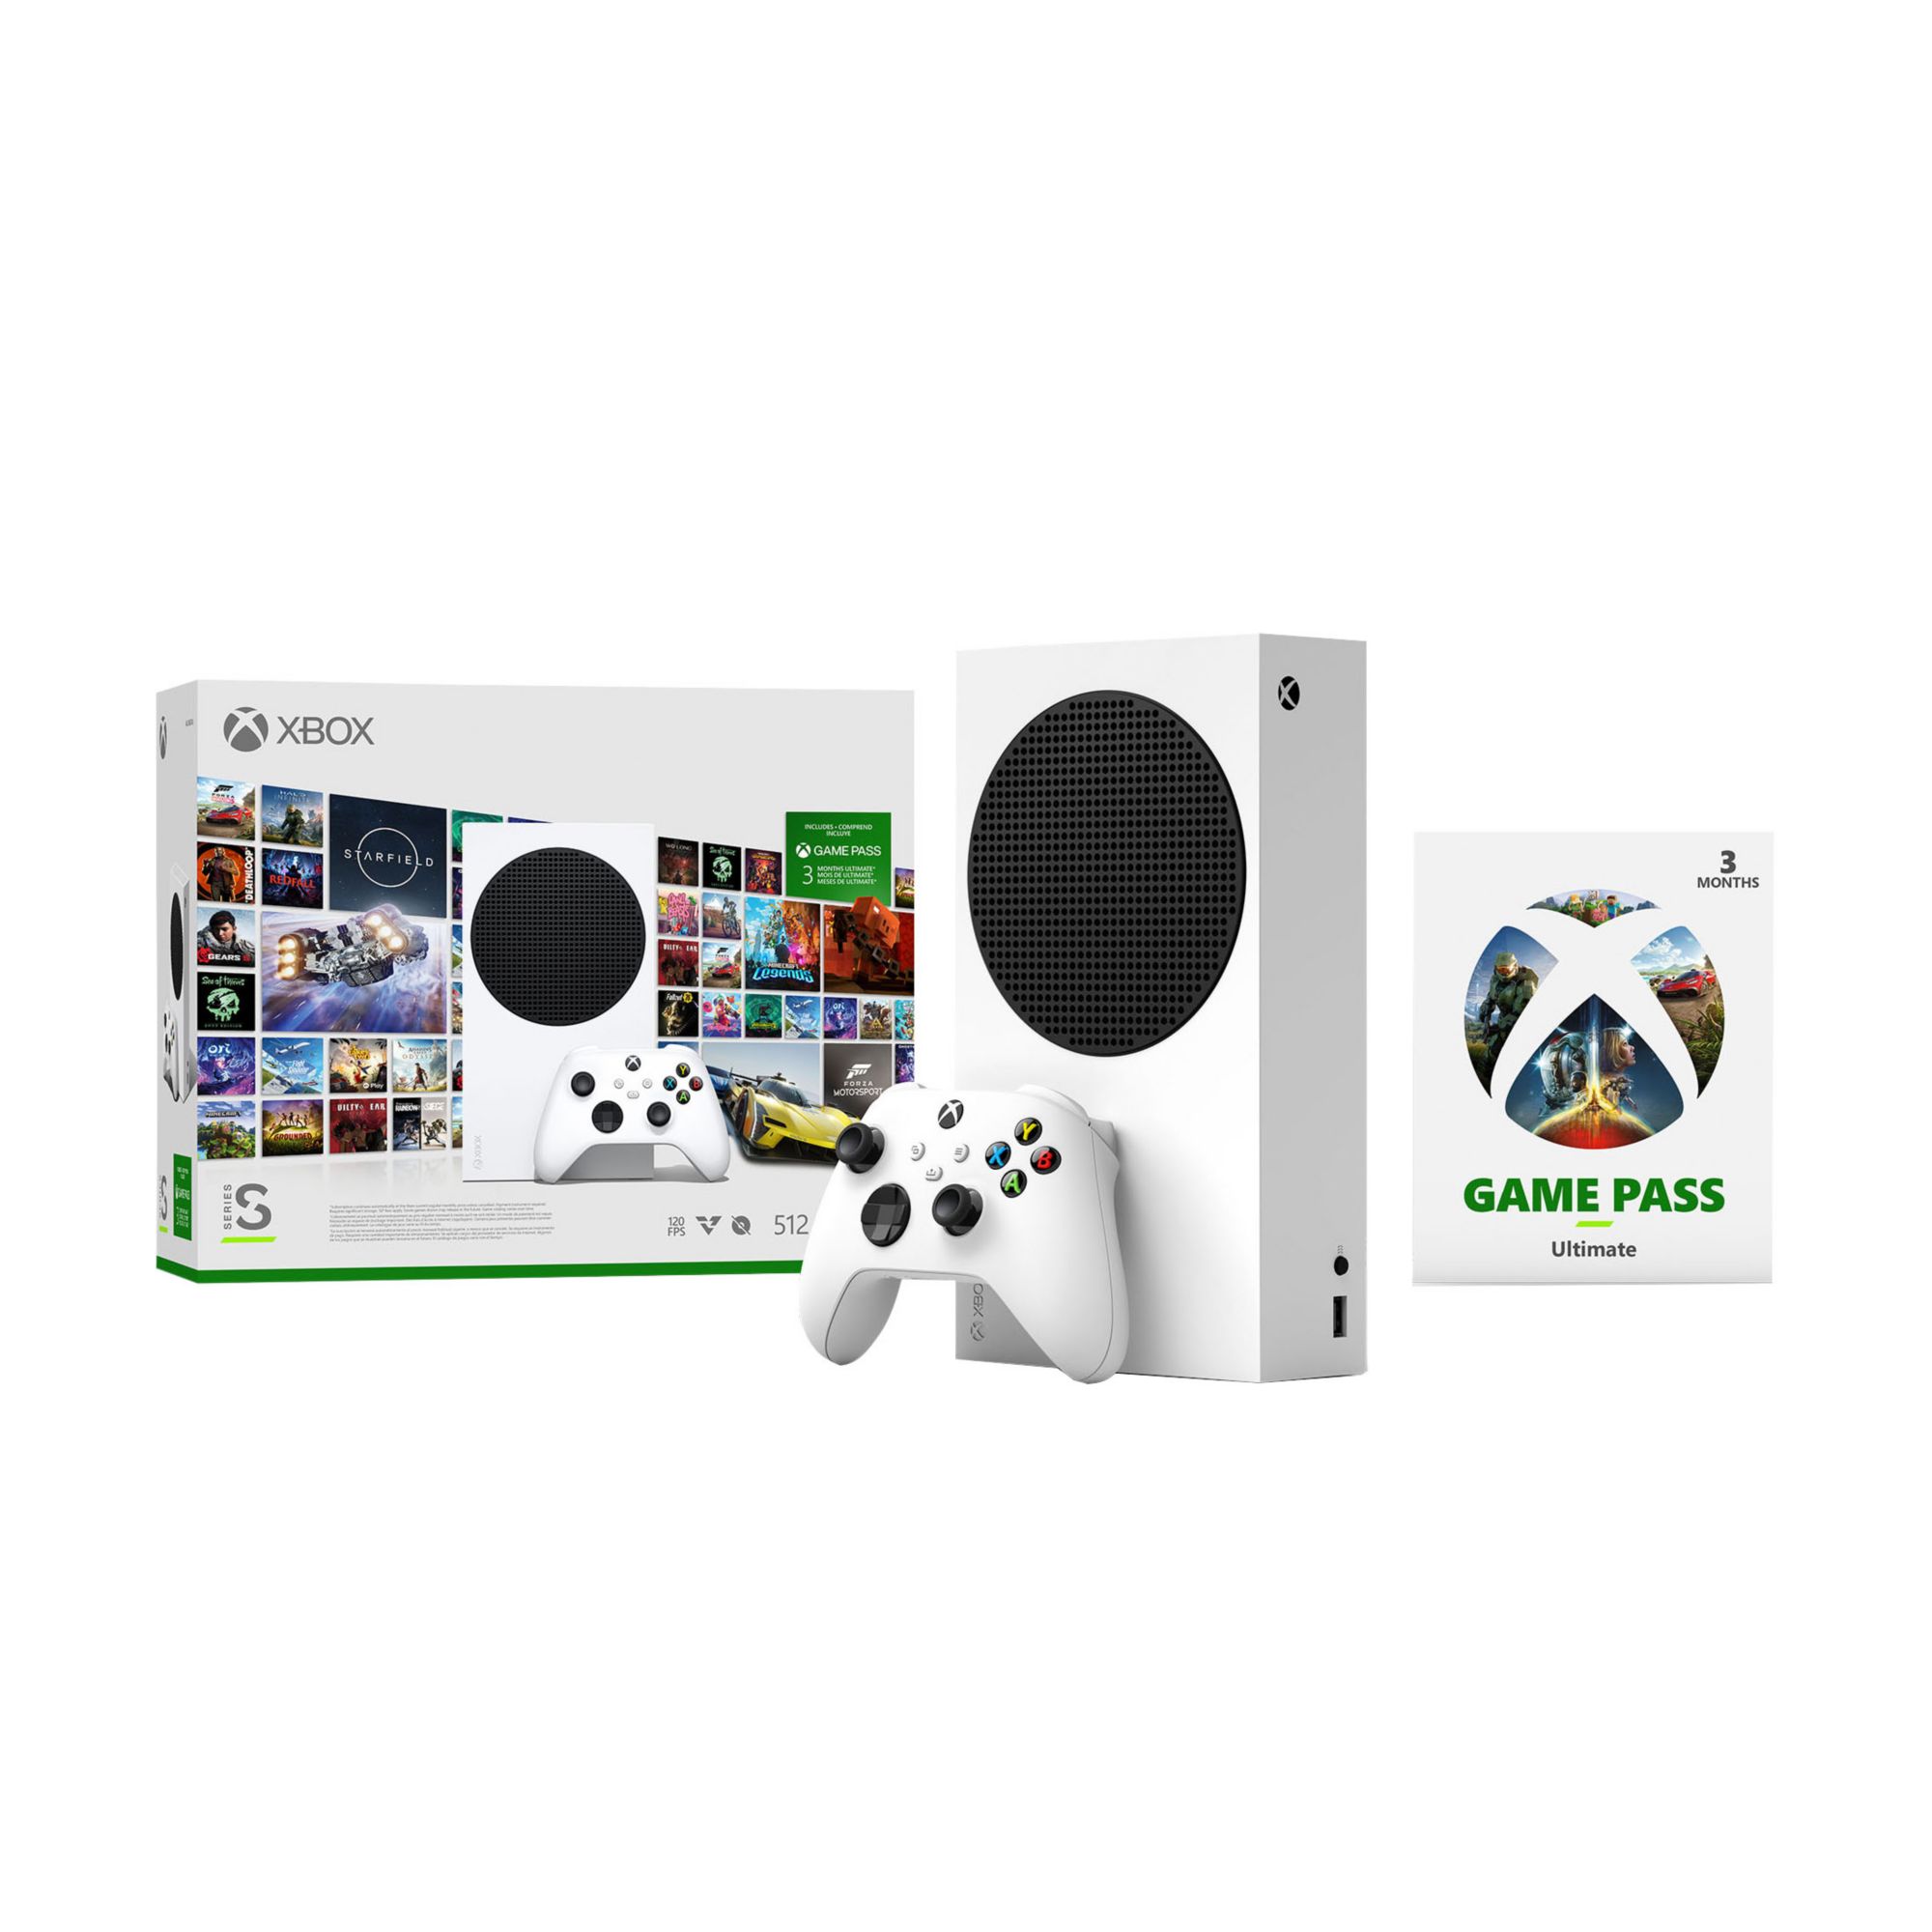 Introducing new product pages for the Xbox Store! - Xbox Wire